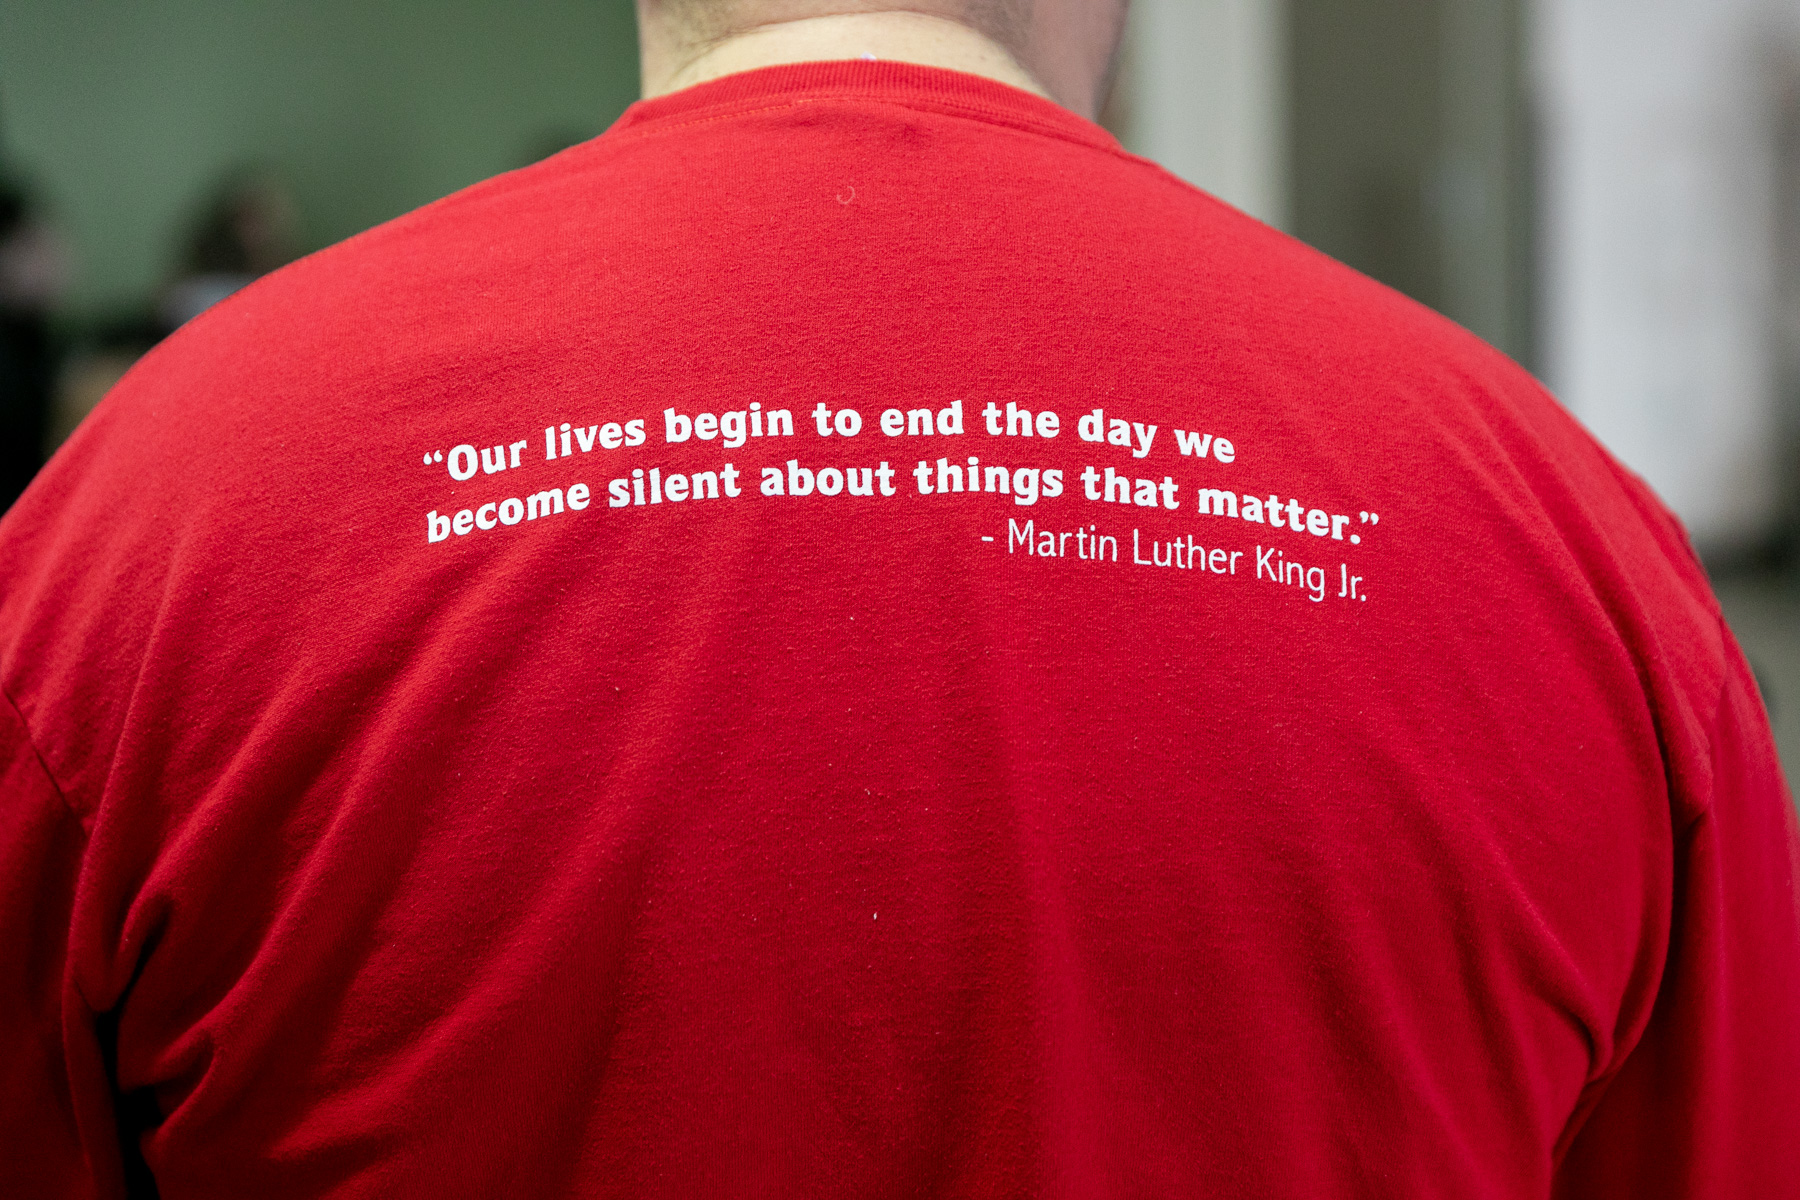 T-shirt that reads "Our lives begin to end the day we become silent about things that matter," by Martin Luther King